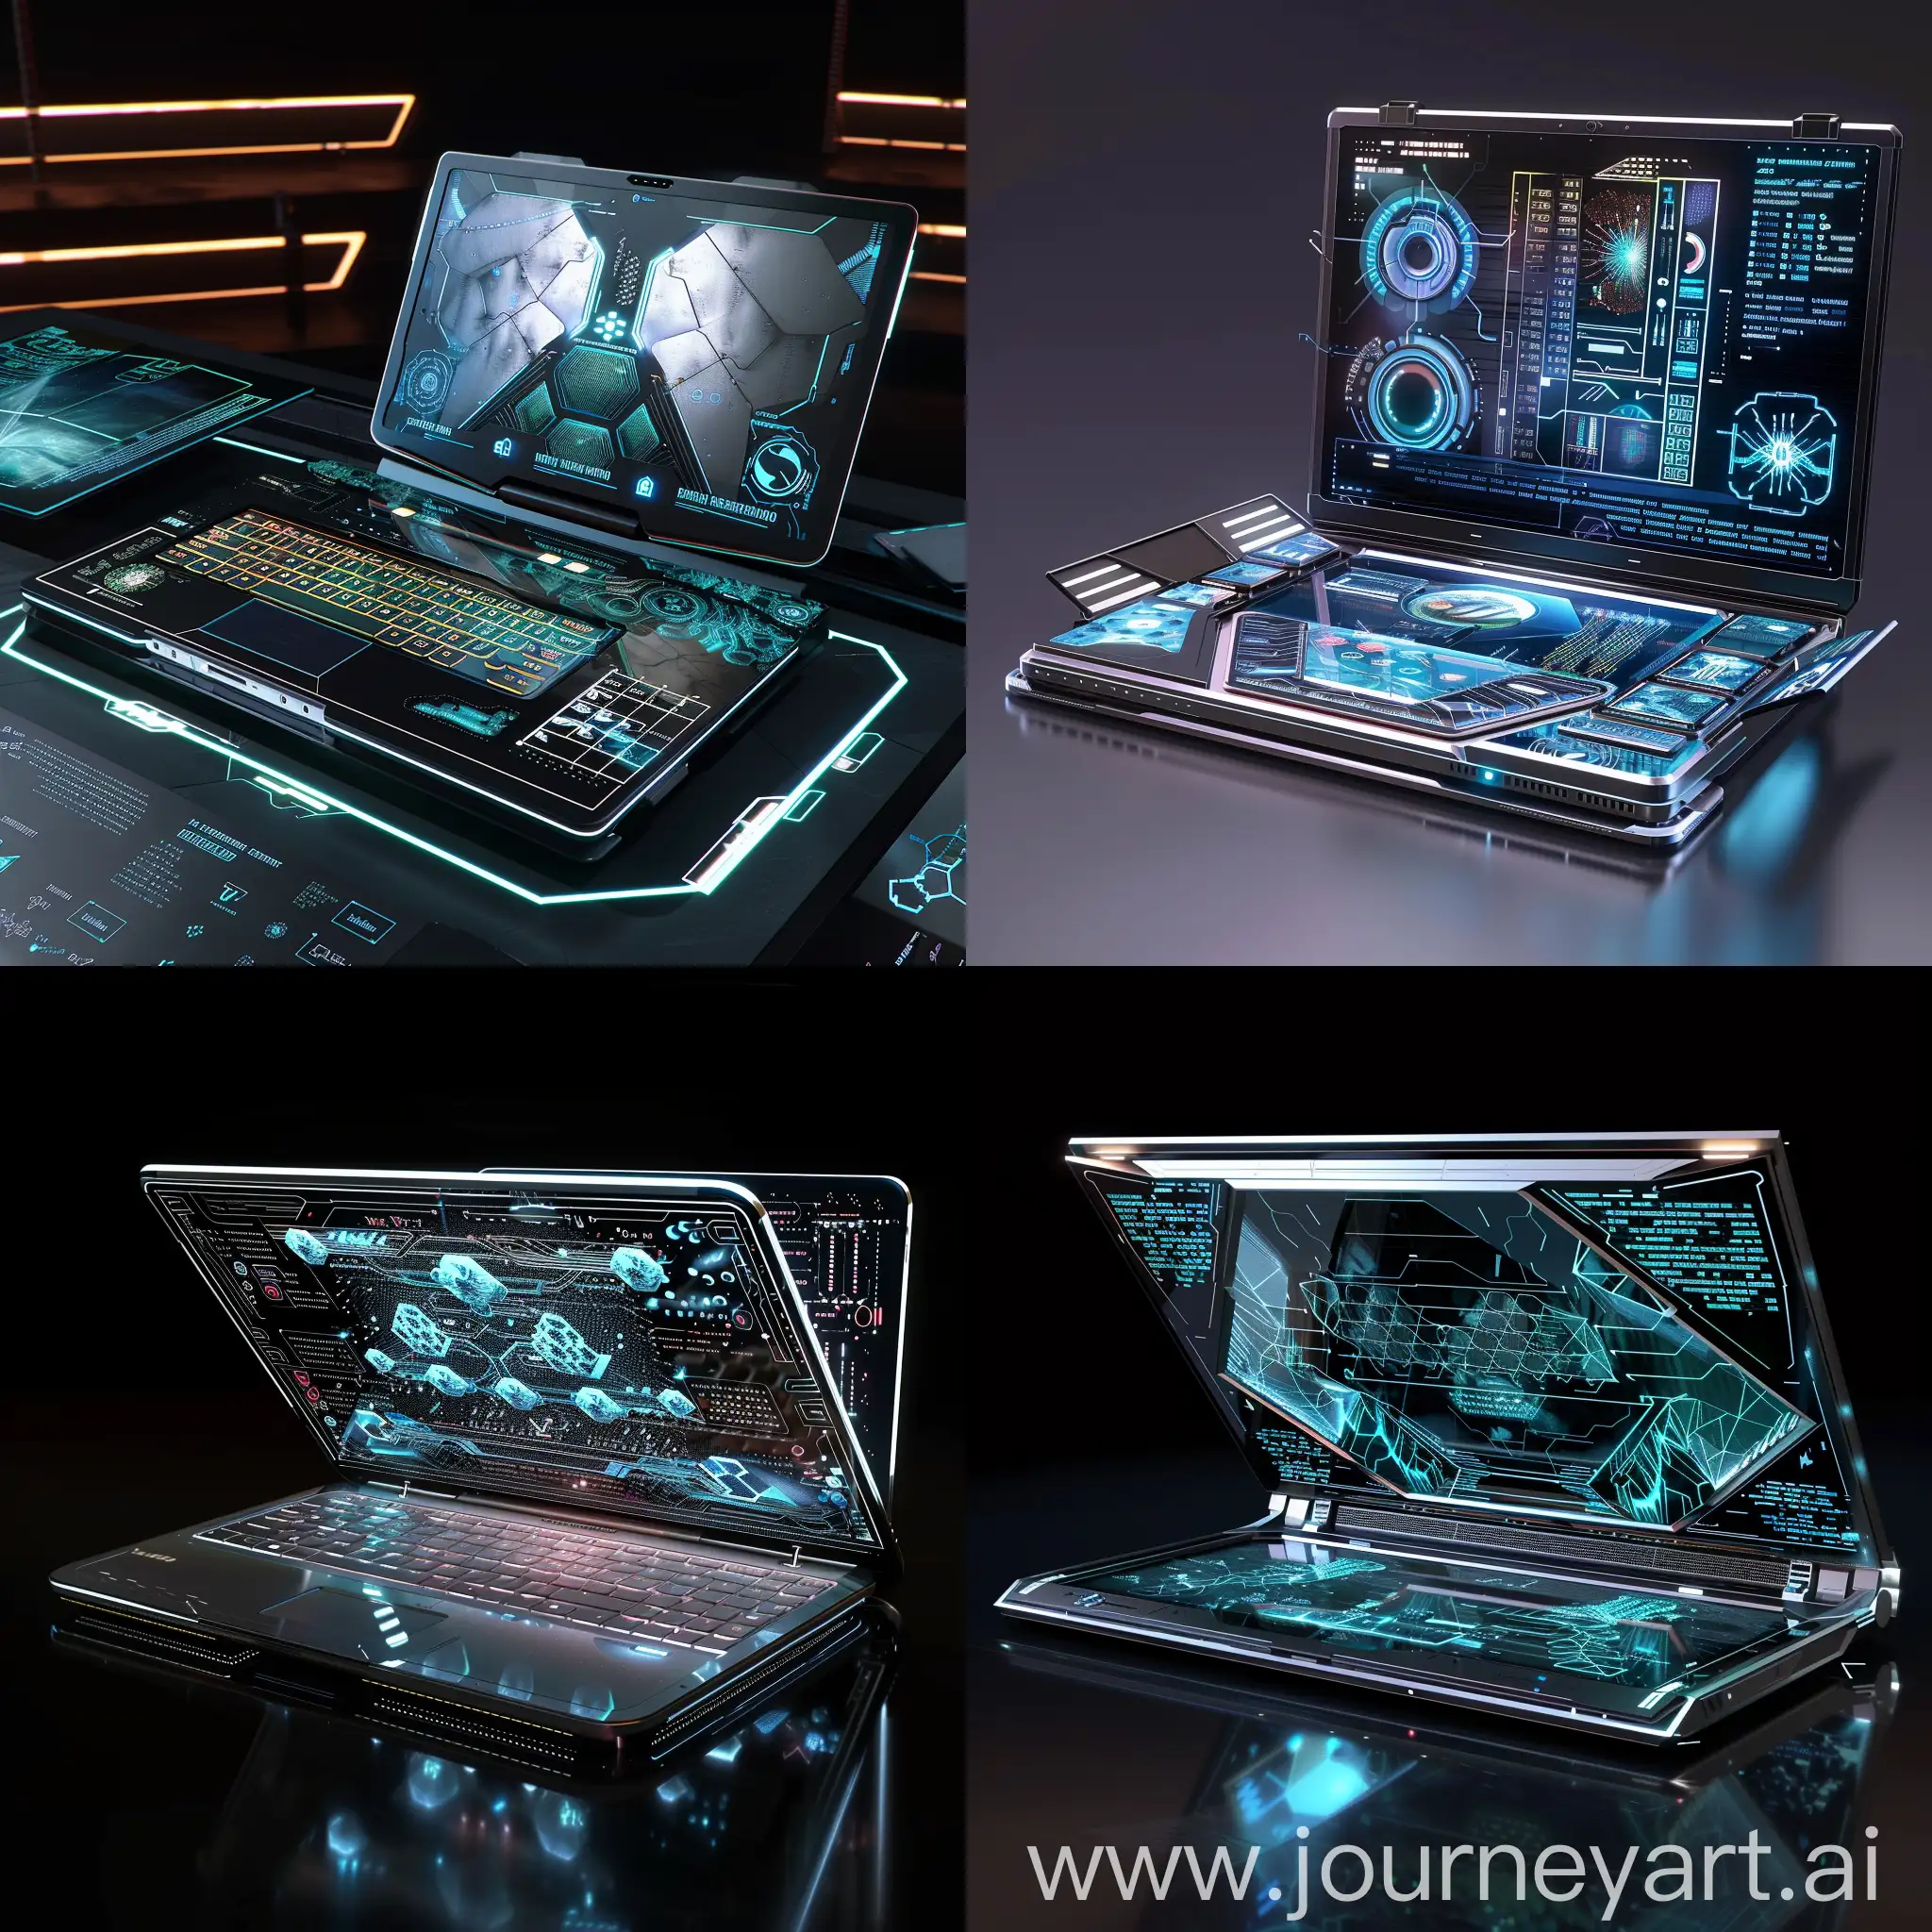 Futuristic-Laptop-with-Quantum-Processing-Units-and-Flexible-Display